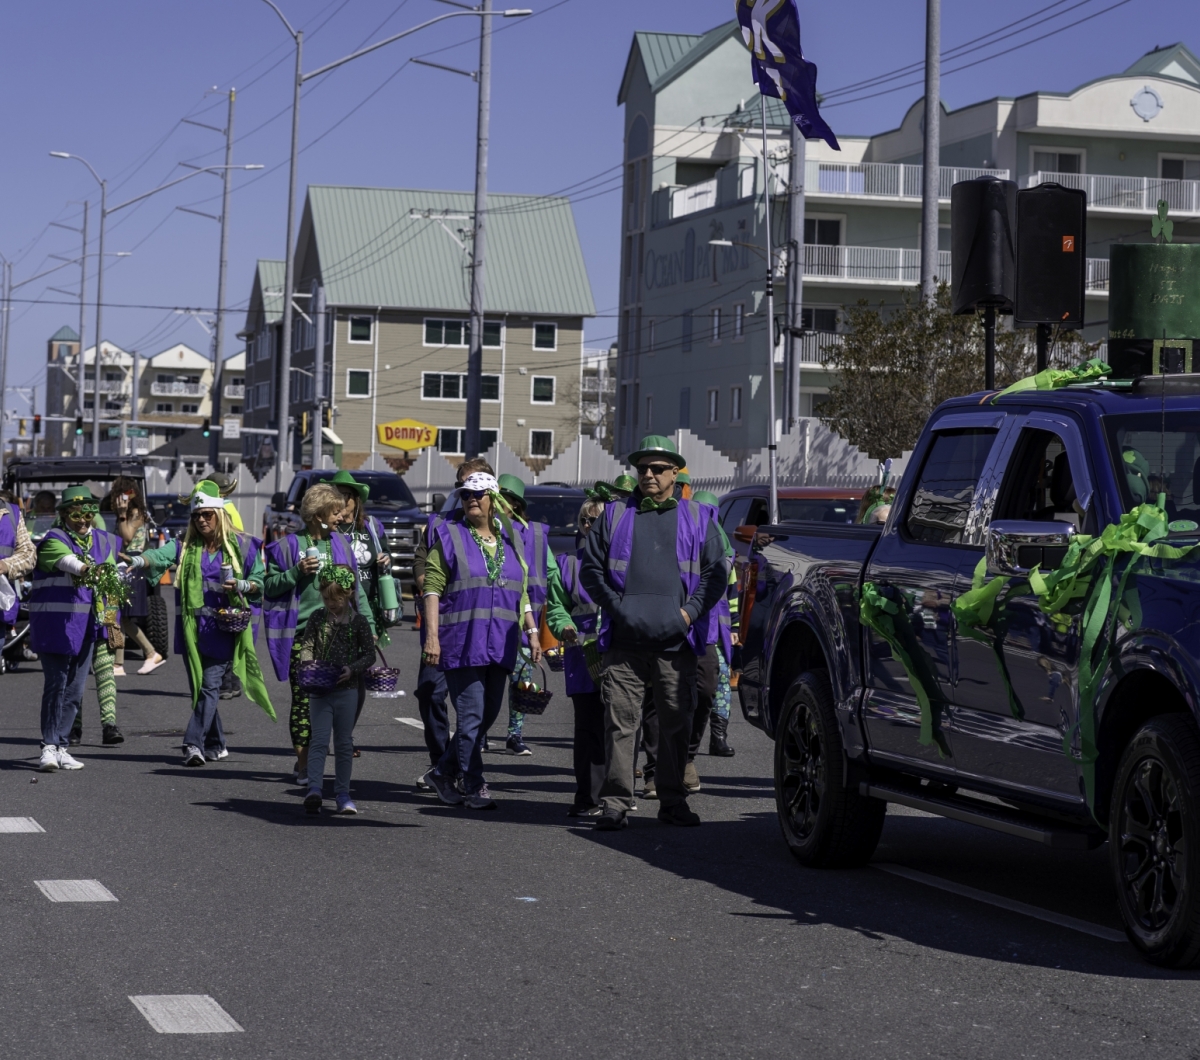 Group of people wearing purple and green at the parade